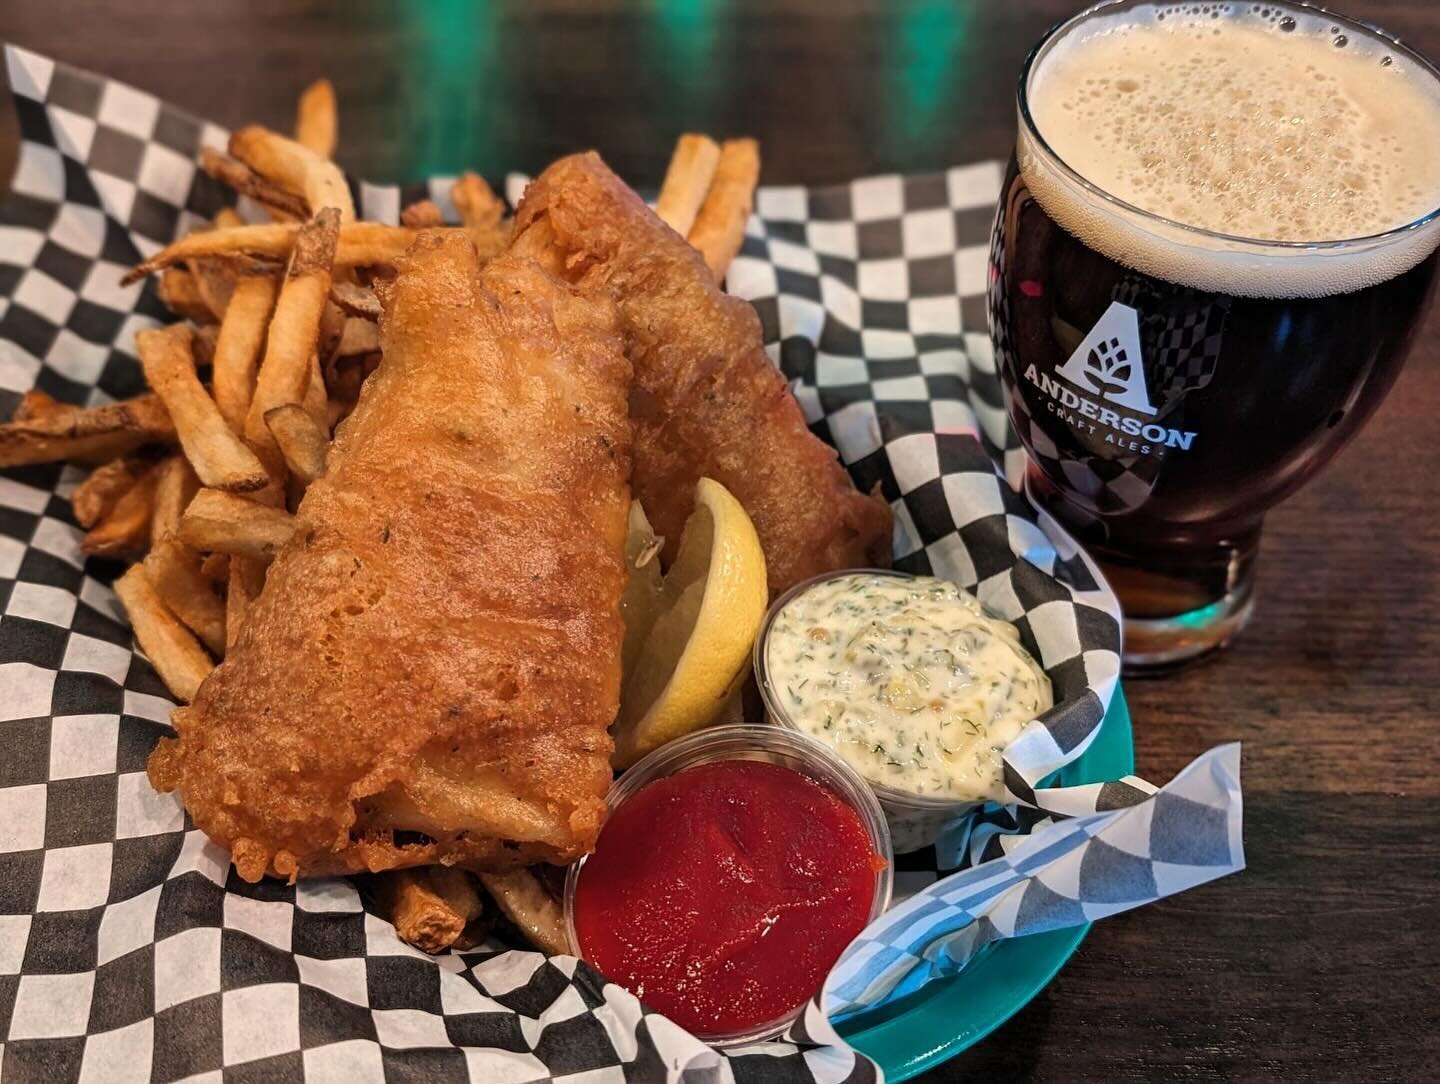 This St. Patrick&rsquo;s Day ☘️ 
You&rsquo;ll be lucky to come and try our Fish and Chips available Sunday only!! 

Pair with any of our dark beers or Stout and you&rsquo;ll be dancing a merry jig!